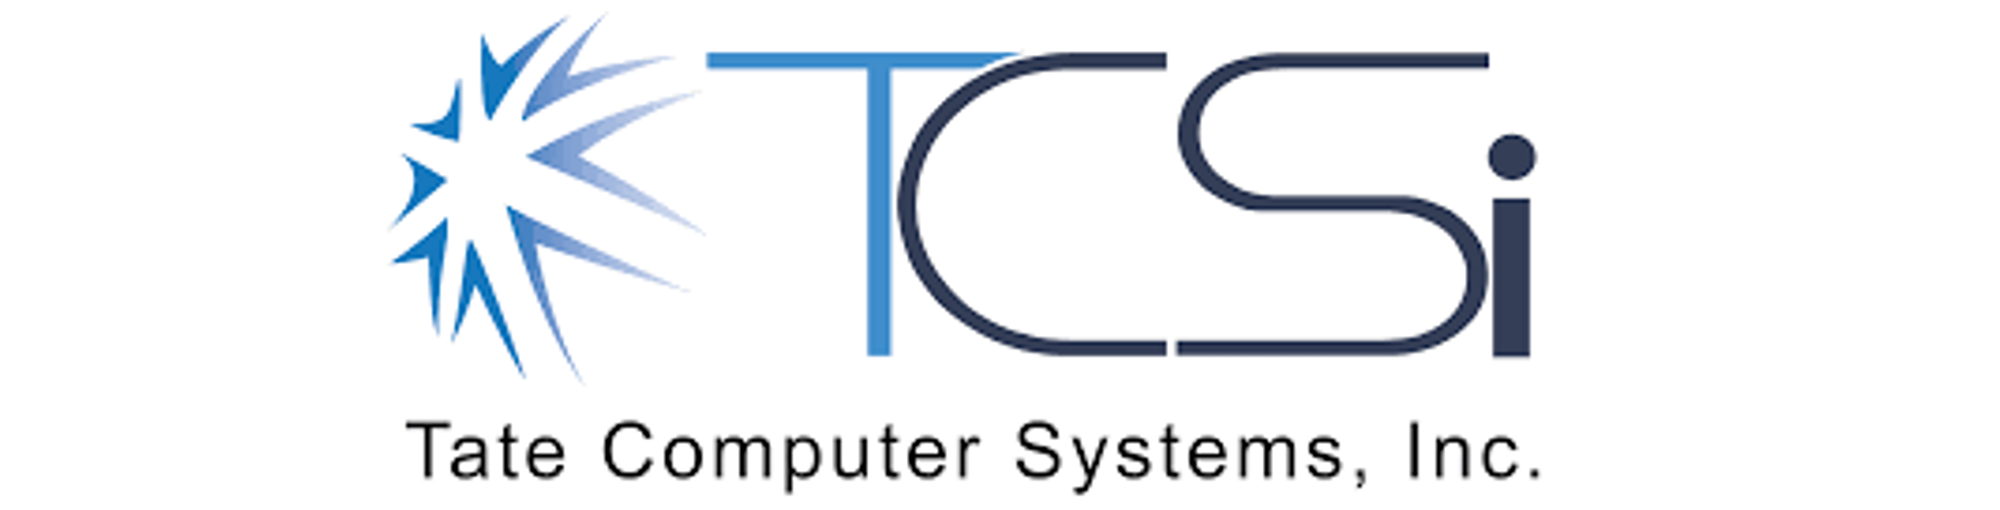 Tate Computer Systems, Inc.